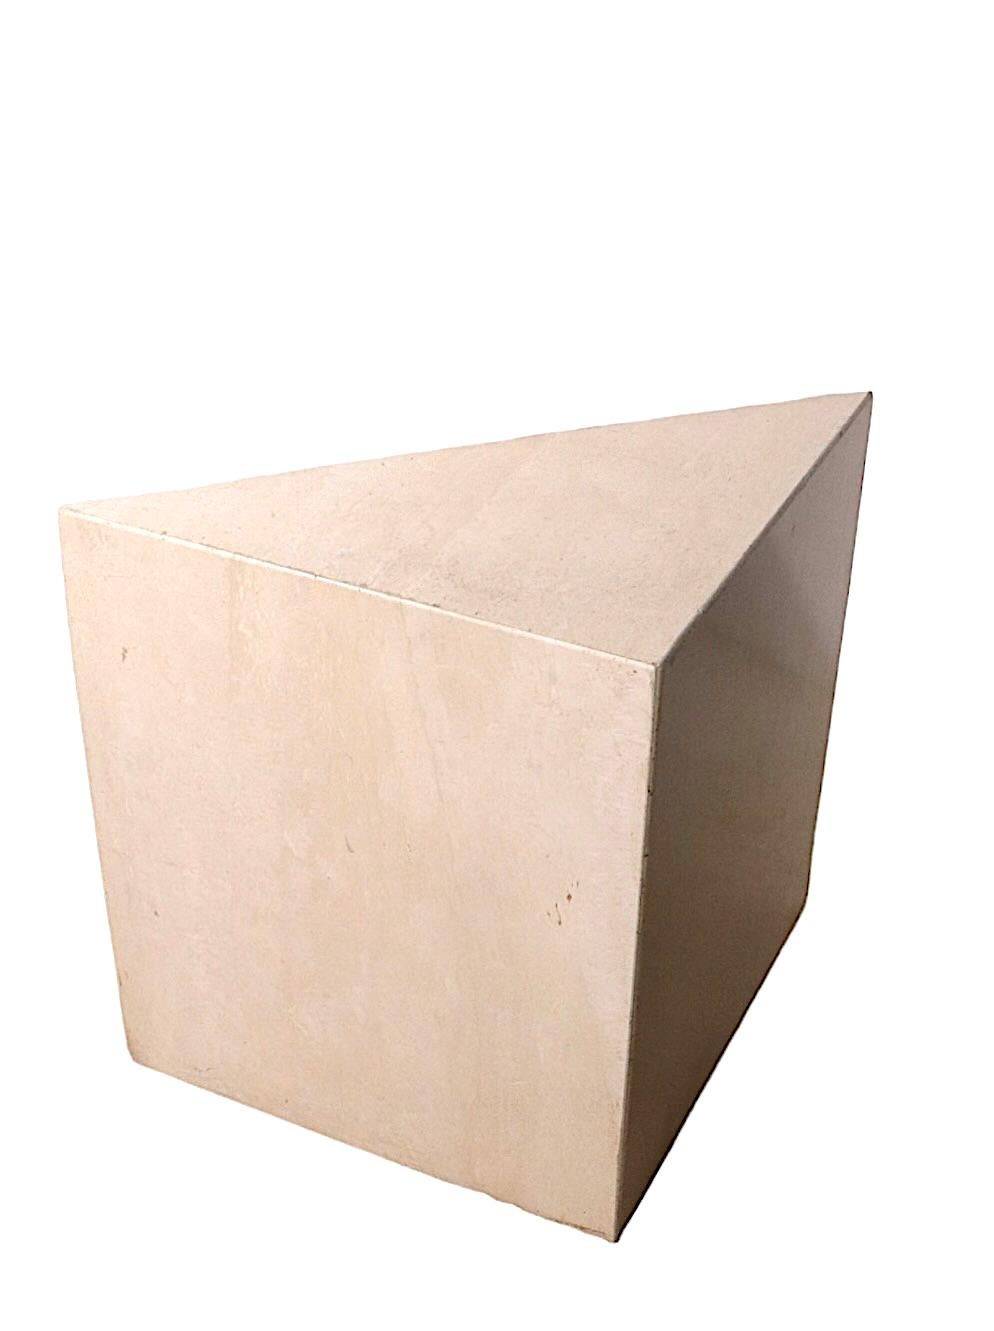 Italian Travertine Marble Side End Table att. to Up & Up Made in Italy c. 1970’s For Sale 2